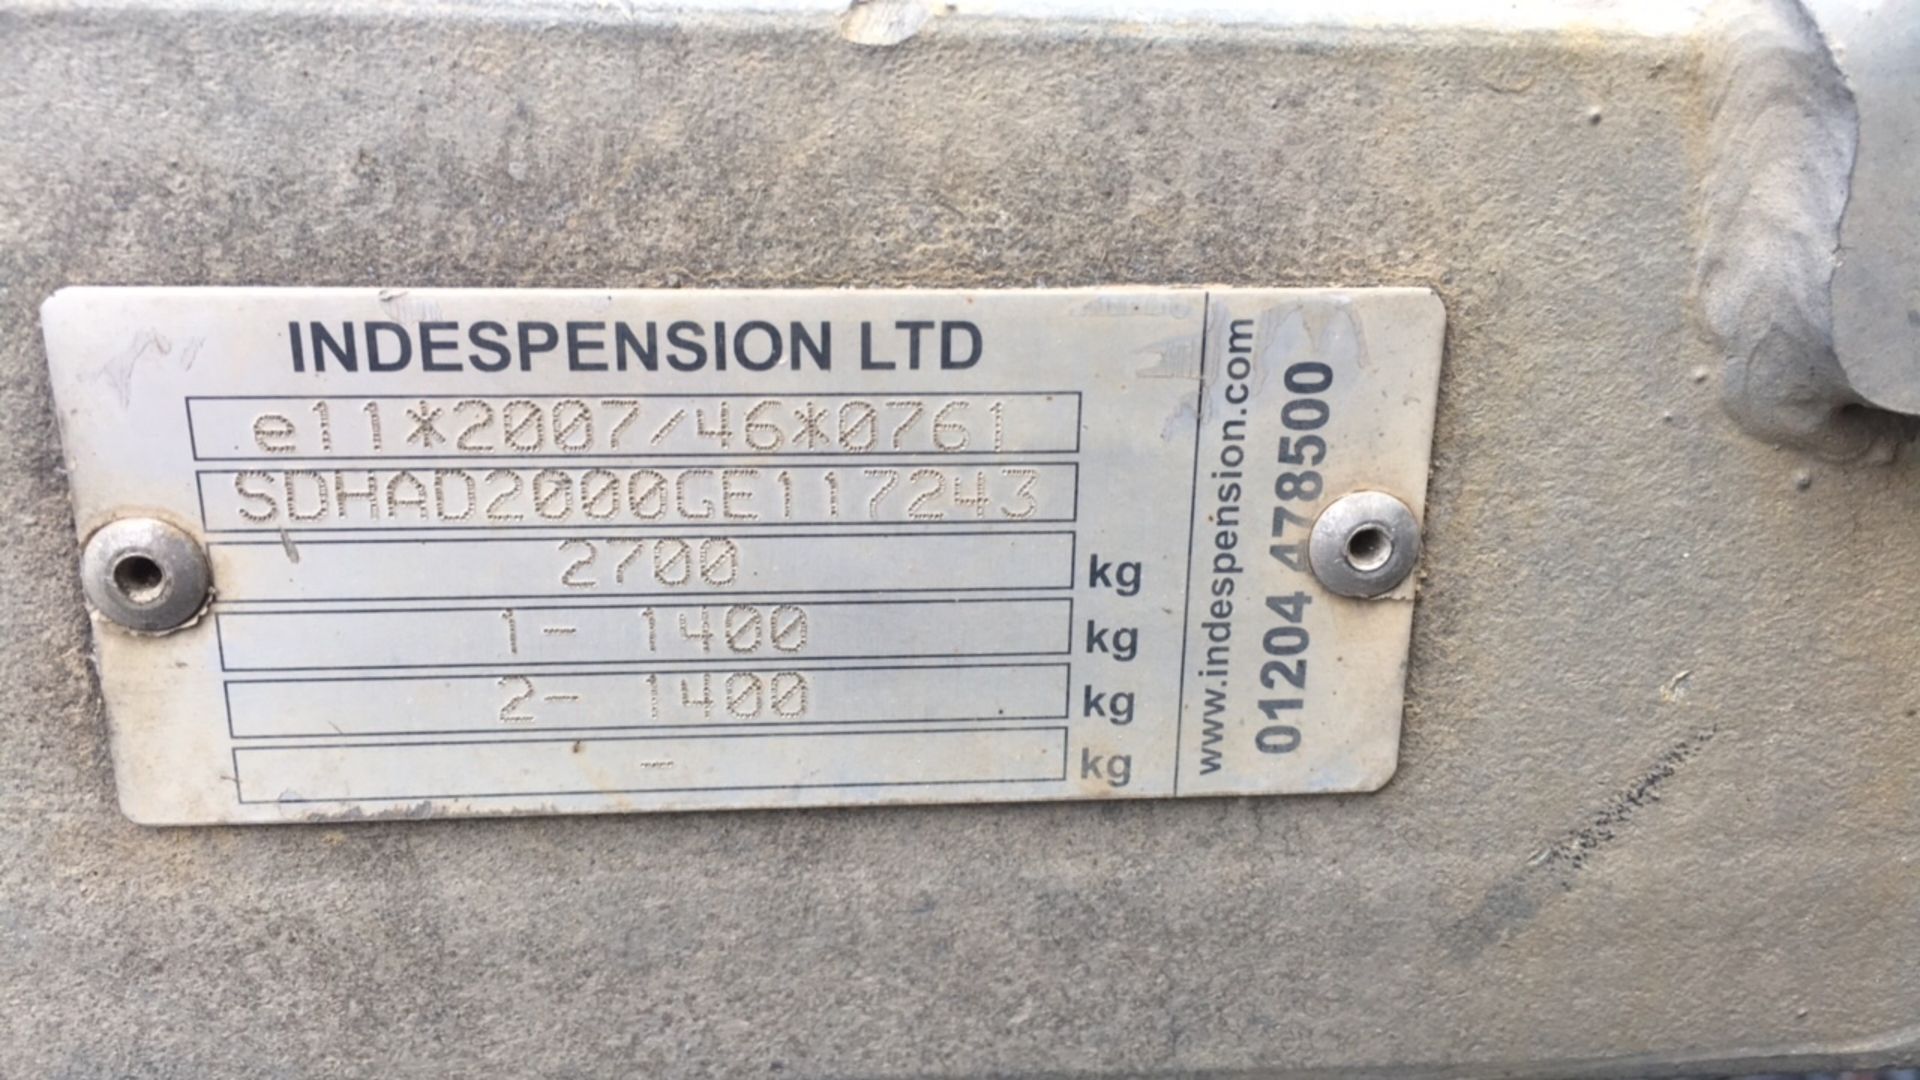 Indespension plant trailer (A658622) - Image 3 of 8